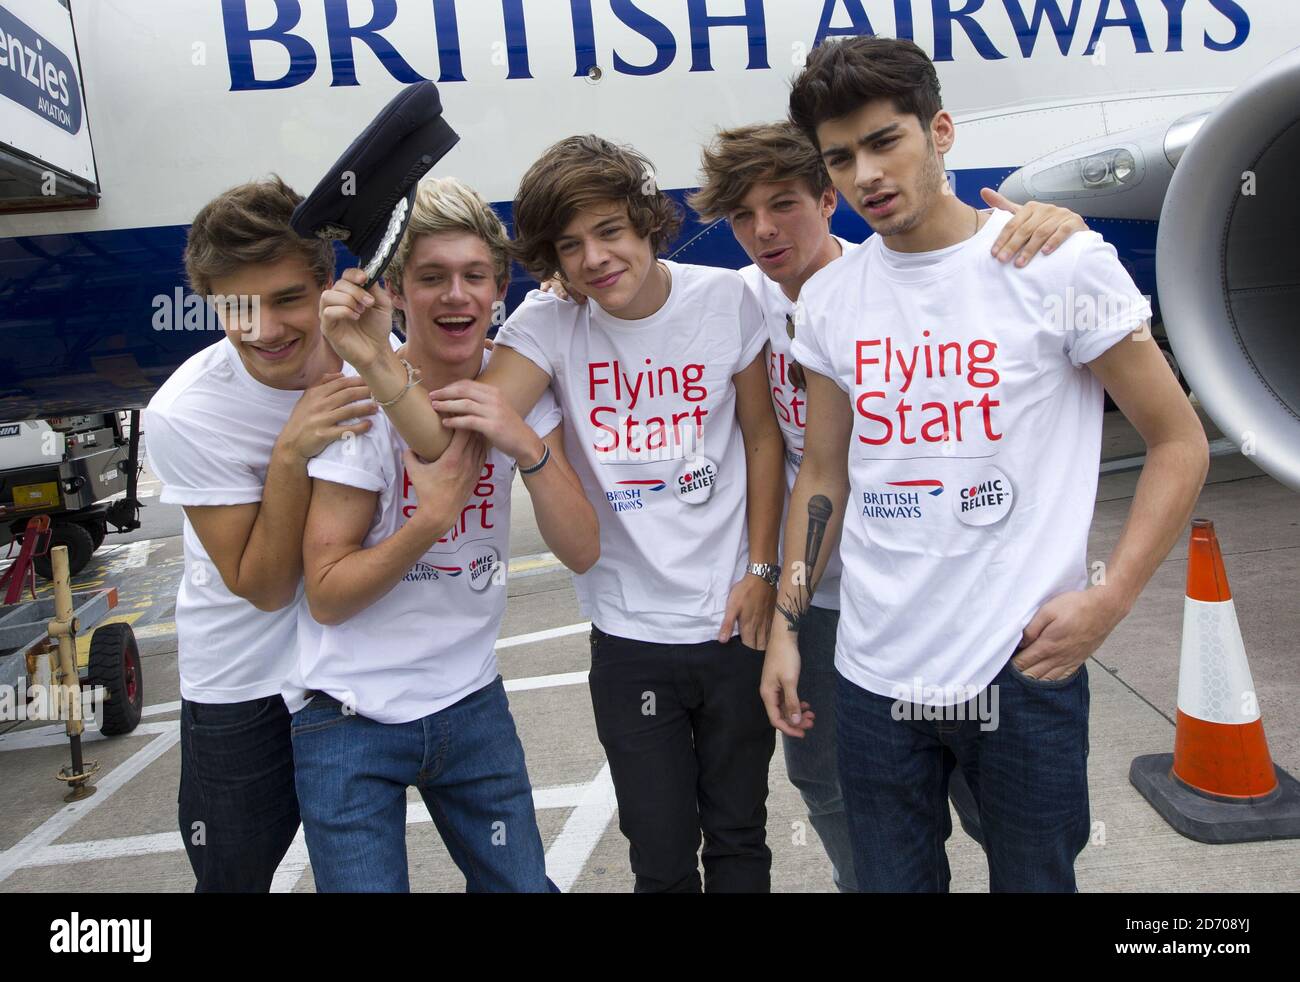 One Direction L R Liam Payne Niall Horan Harry Styles Louis Tomlinson And Zayn Malik Pictured Next To Flight Ba1d A Private Charter Flight From London To Manchester Hosted By The Band